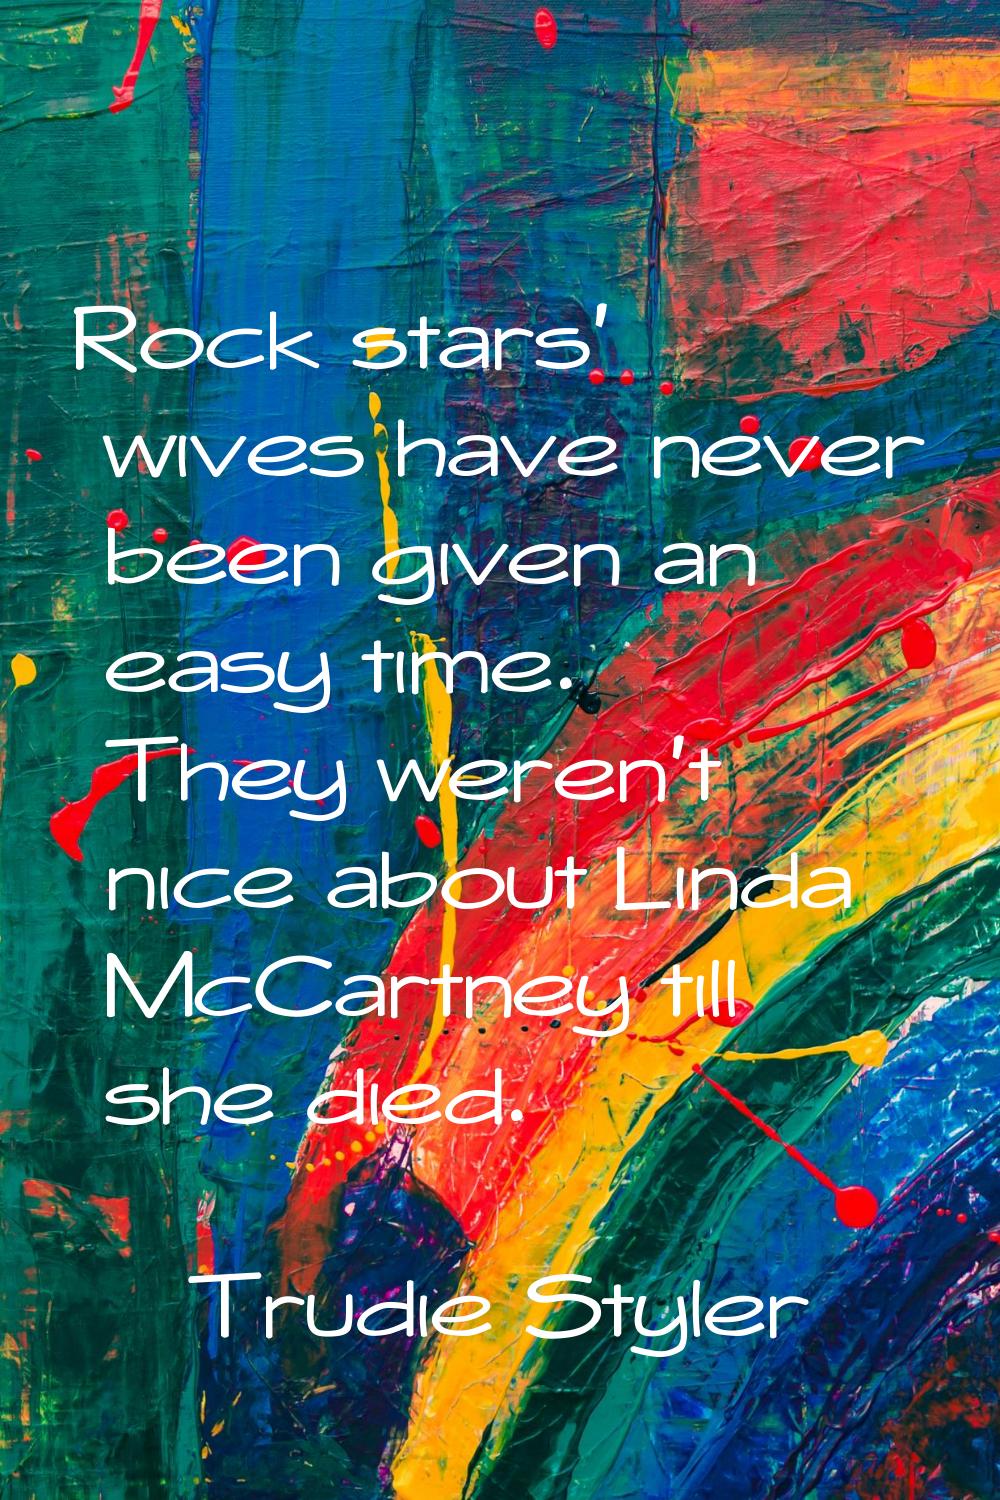 Rock stars' wives have never been given an easy time. They weren't nice about Linda McCartney till 